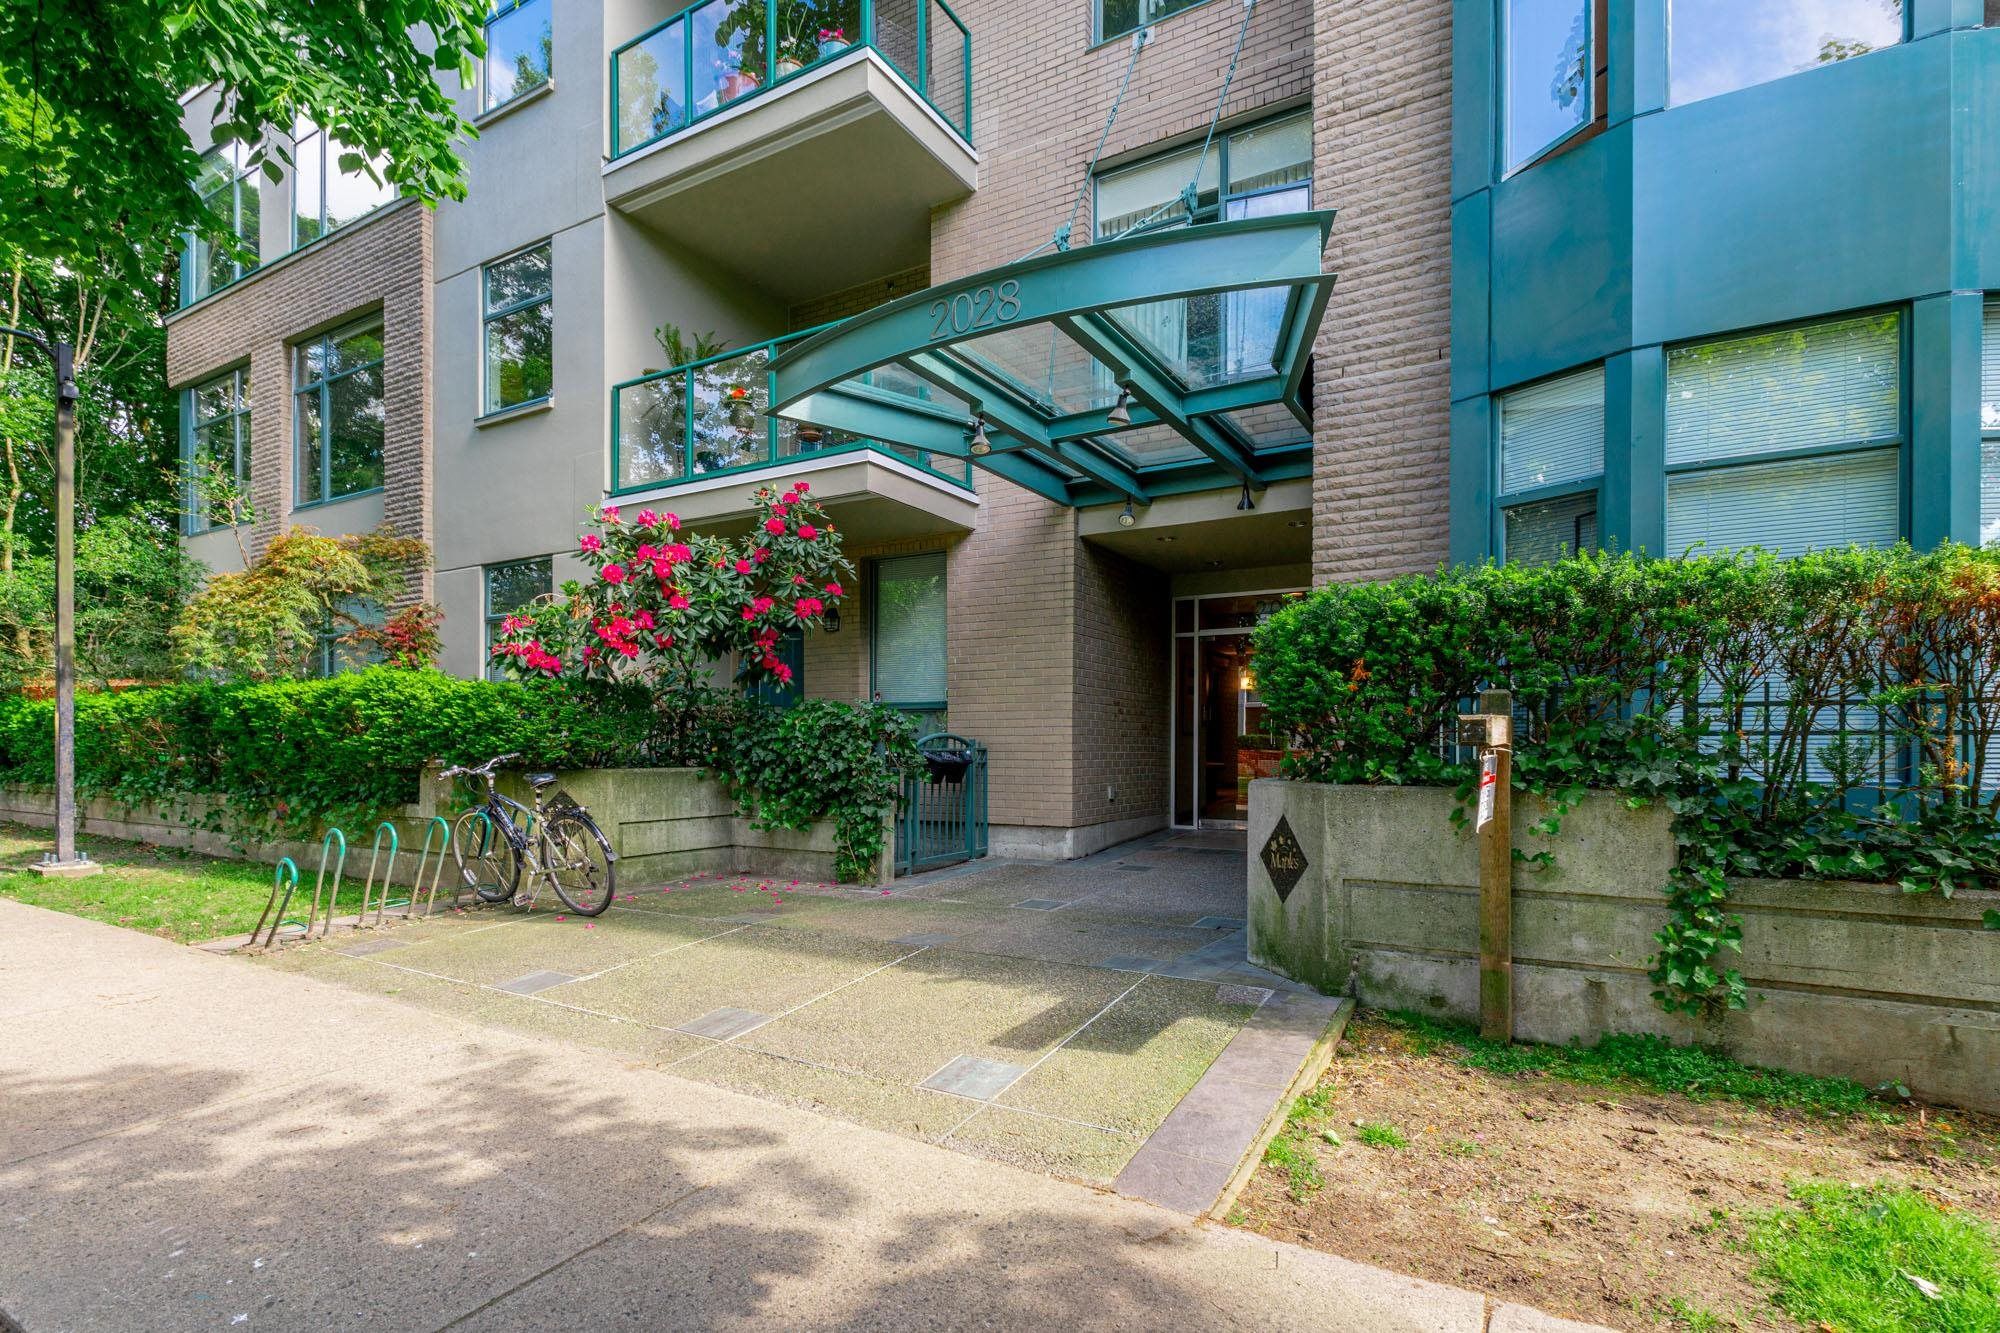 I have sold a property at 203 2028 11TH AVE W in Vancouver
